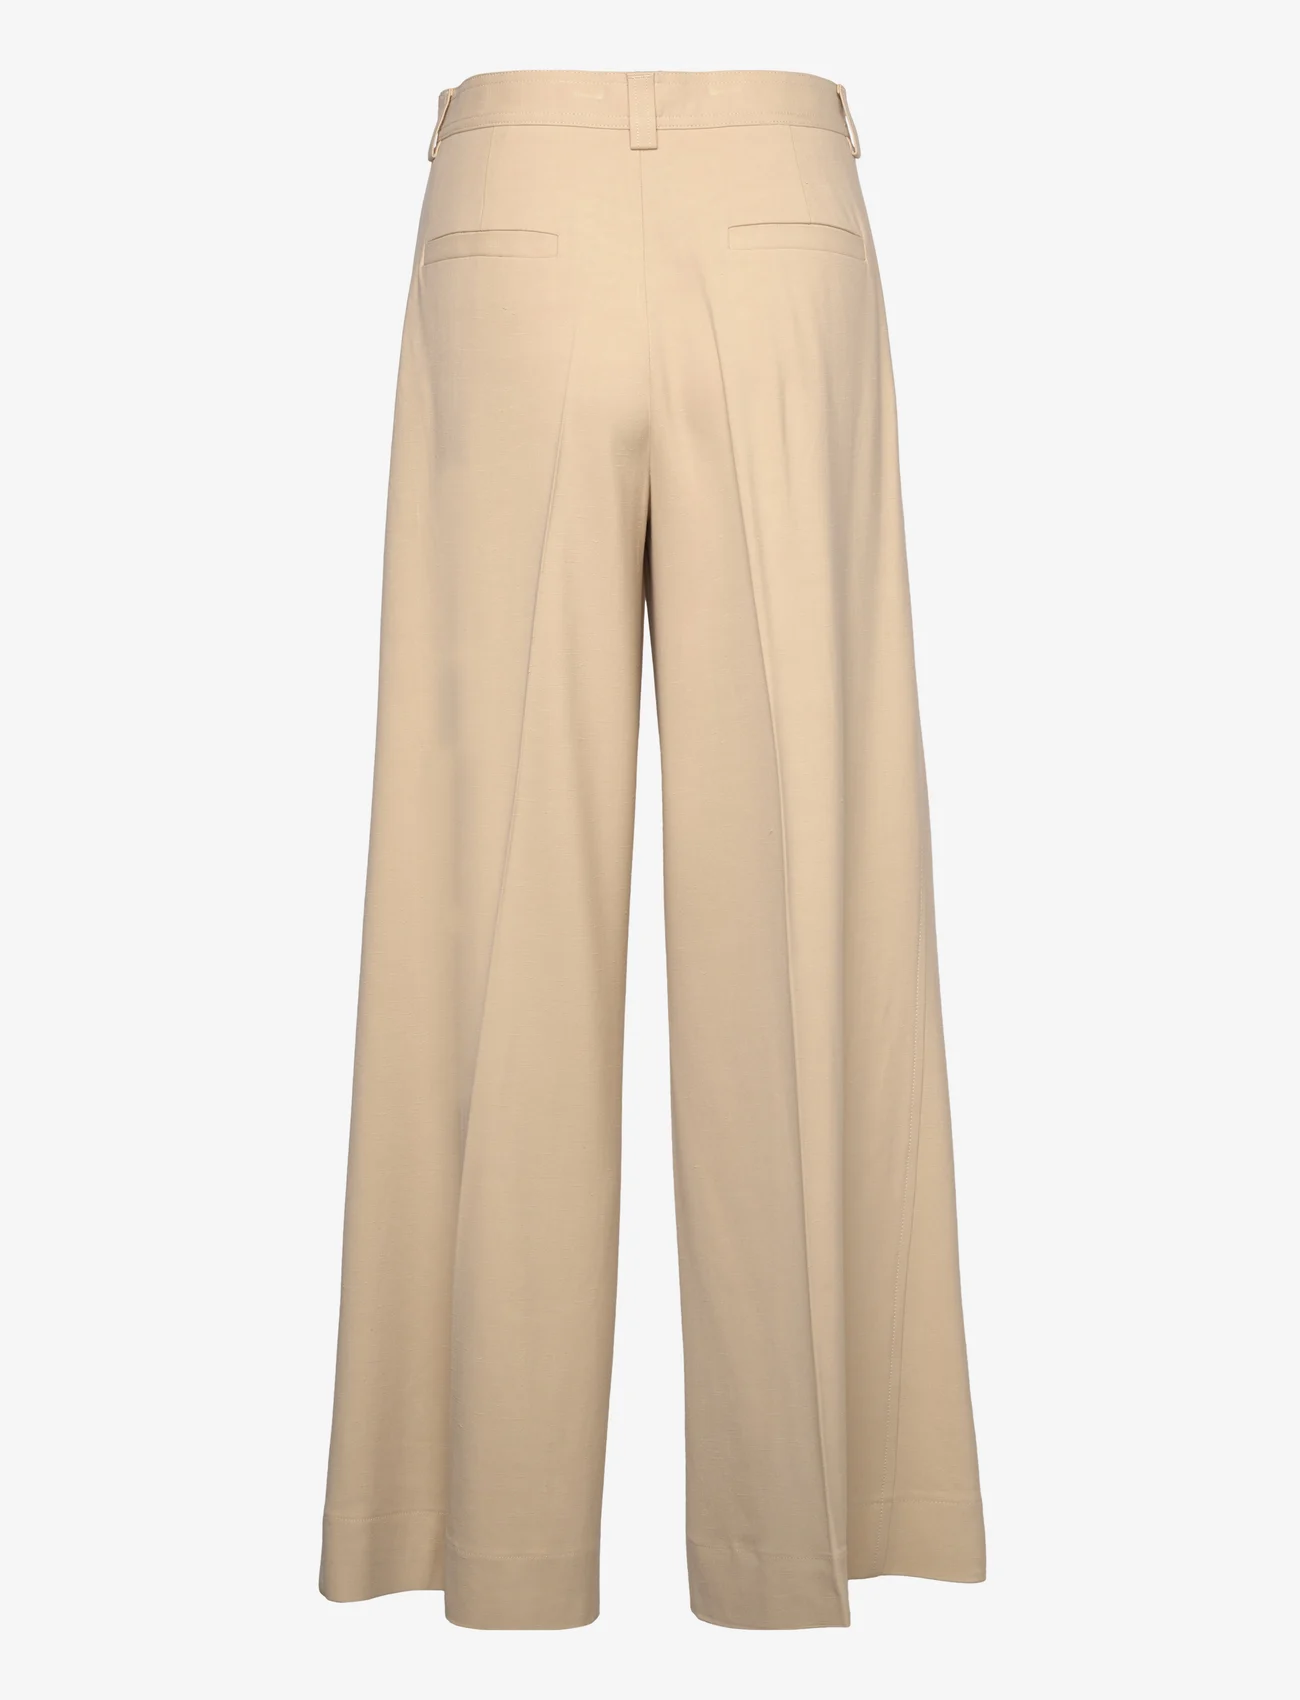 RODEBJER - Rodebjer Addie - wide leg trousers - sand - 1